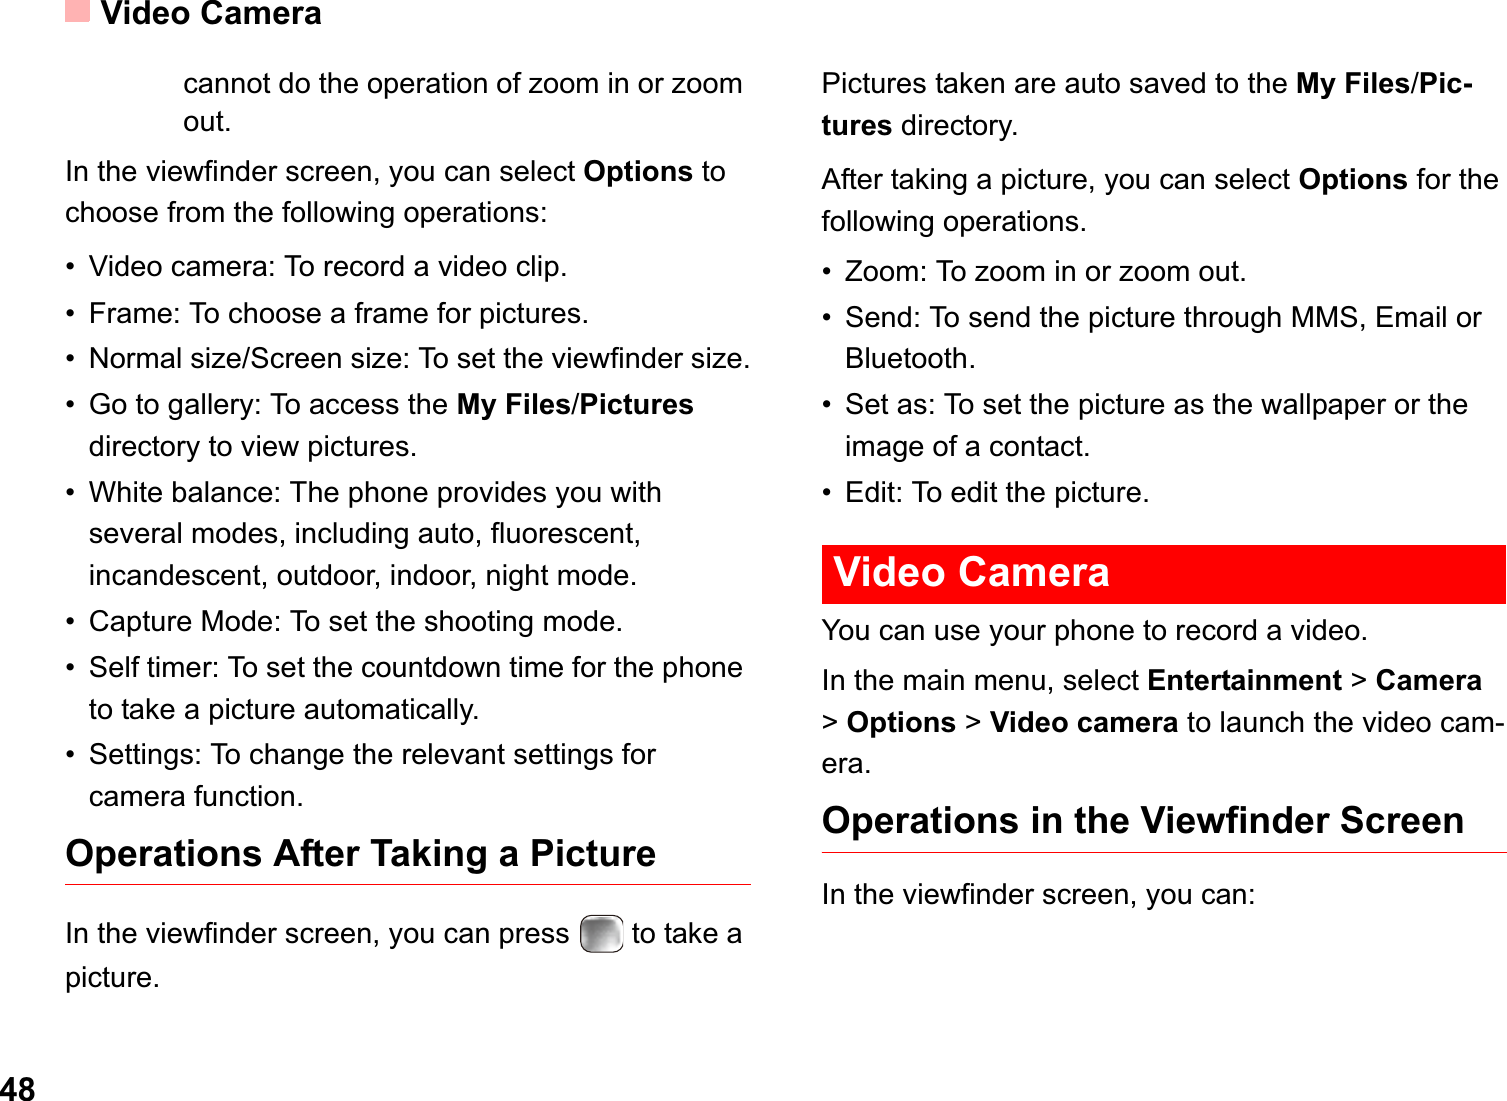 Video Camera48cannot do the operation of zoom in or zoom out. In the viewfinder screen, you can select Options to choose from the following operations:• Video camera: To record a video clip.• Frame: To choose a frame for pictures.• Normal size/Screen size: To set the viewfinder size.• Go to gallery: To access the My Files/Picturesdirectory to view pictures.• White balance: The phone provides you with several modes, including auto, fluorescent, incandescent, outdoor, indoor, night mode.• Capture Mode: To set the shooting mode.• Self timer: To set the countdown time for the phone to take a picture automatically. • Settings: To change the relevant settings for camera function.Operations After Taking a PictureIn the viewfinder screen, you can press   to take a picture.Pictures taken are auto saved to the My Files/Pic-tures directory.After taking a picture, you can select Options for the following operations.• Zoom: To zoom in or zoom out.• Send: To send the picture through MMS, Email or Bluetooth.• Set as: To set the picture as the wallpaper or the image of a contact.• Edit: To edit the picture. Video CameraYou can use your phone to record a video.In the main menu, select Entertainment &gt;Camera&gt;Options &gt; Video camera to launch the video cam-era.Operations in the Viewfinder ScreenIn the viewfinder screen, you can: